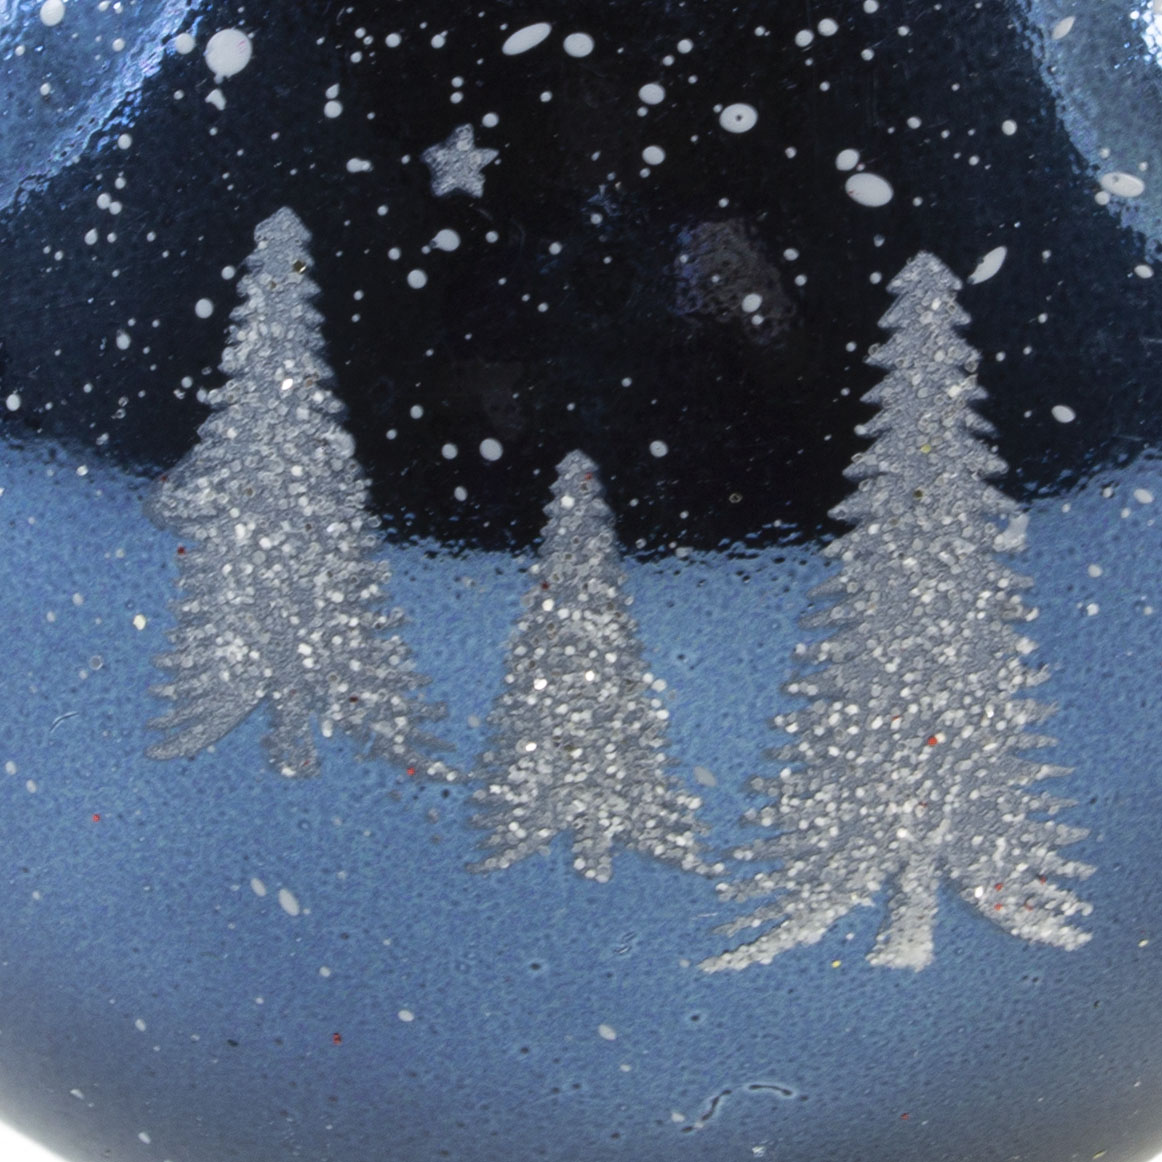 Night Blue Shatterproof Decorated Bauble With Glitter Christmas Tree Design - 80mm